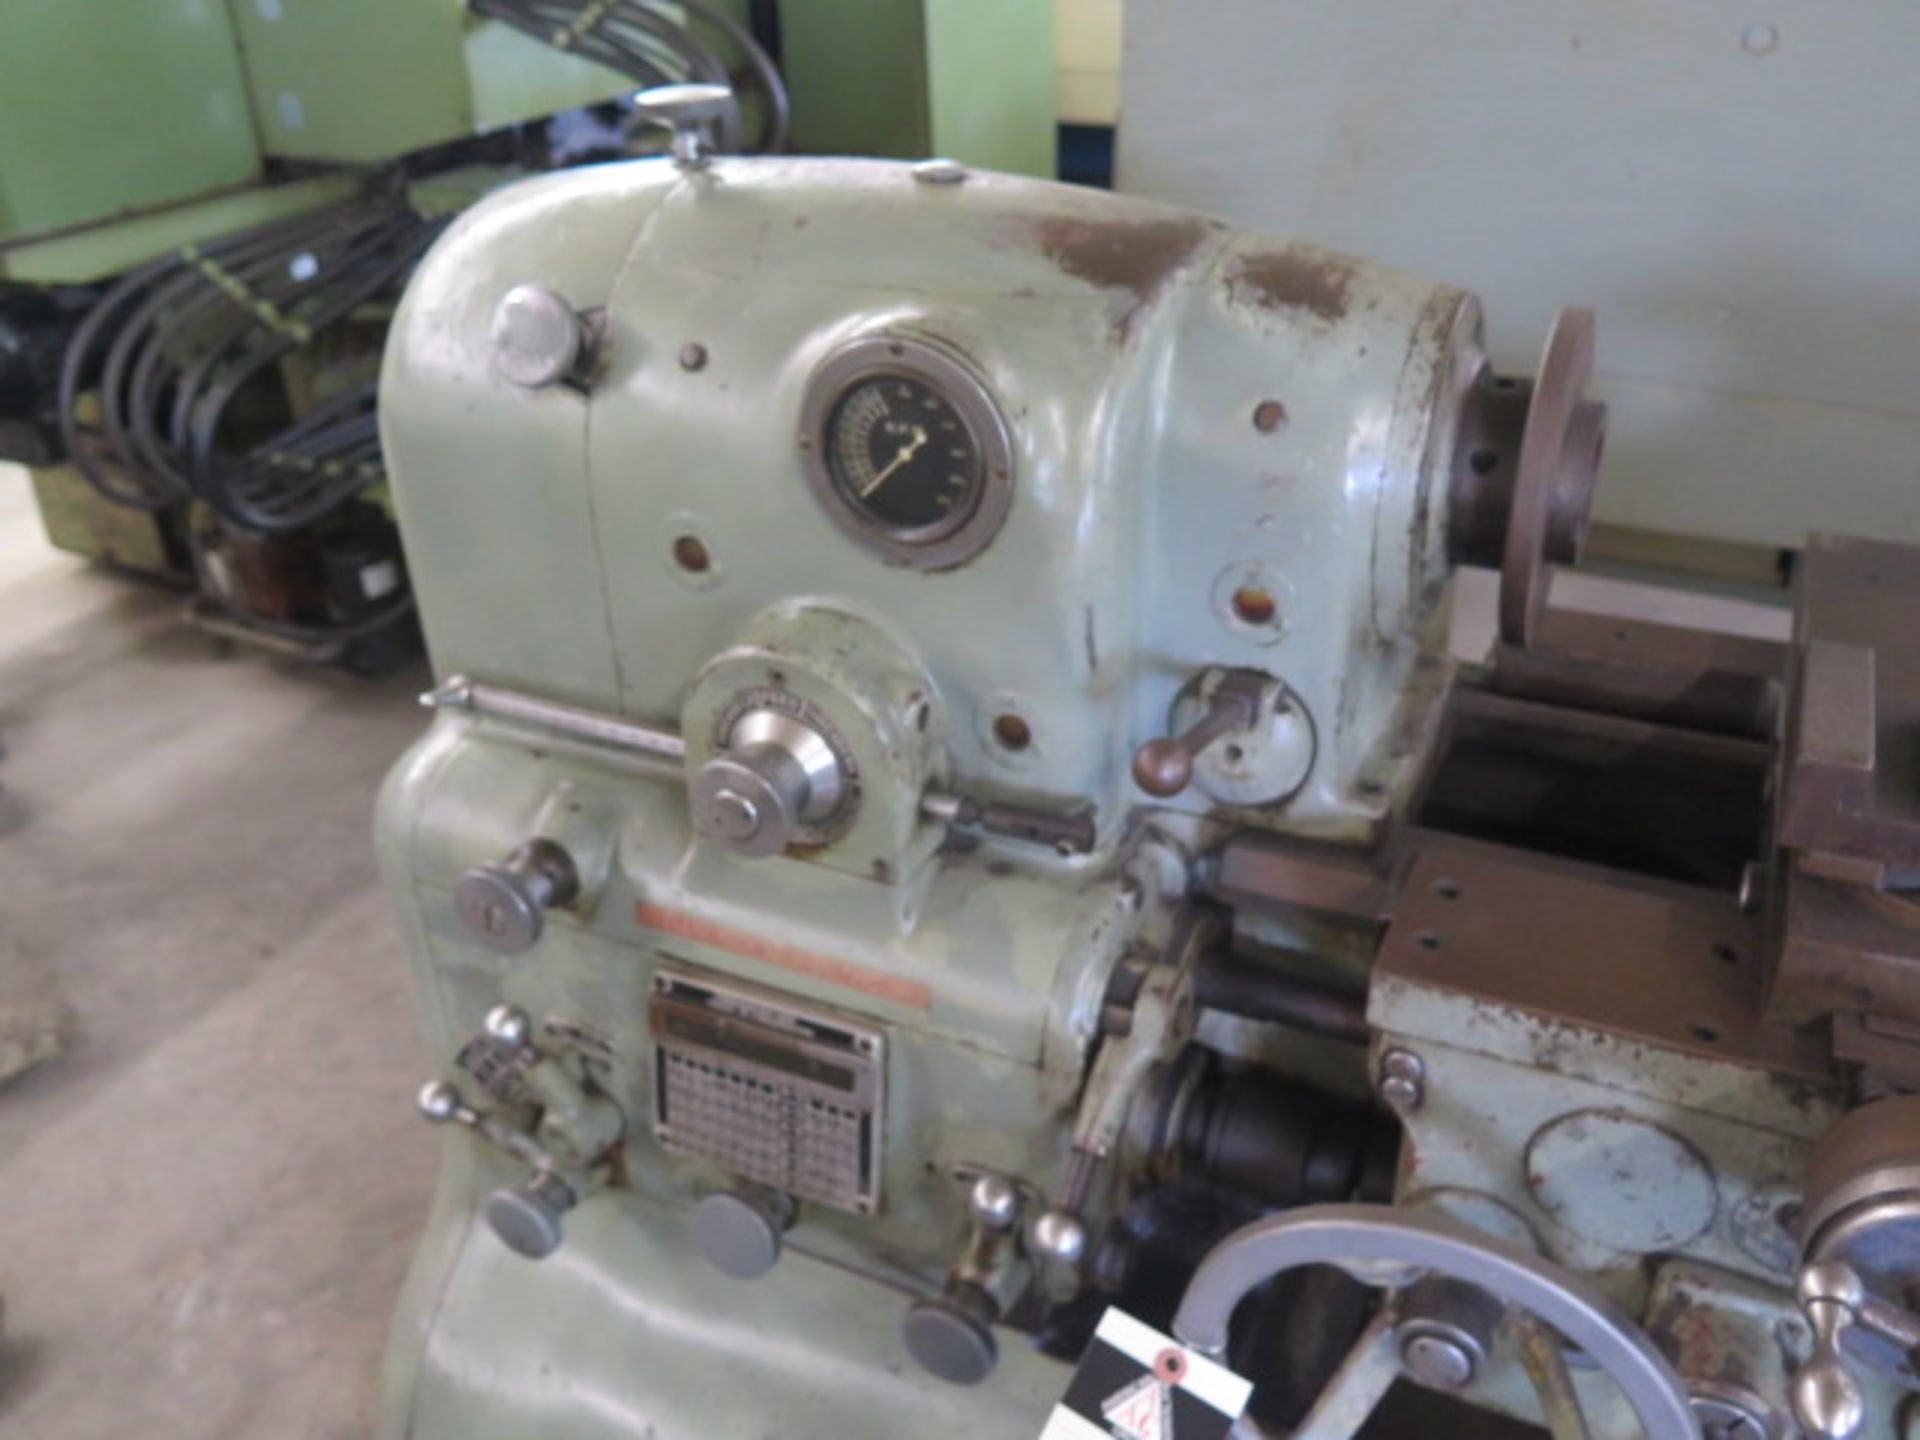 Monarch mdl. 10EE 12 ½” x 20” Tool Room Lathe s/n 28905 w/ 2500 Max RPM, Dial RPM Gage, Inch - Image 3 of 9